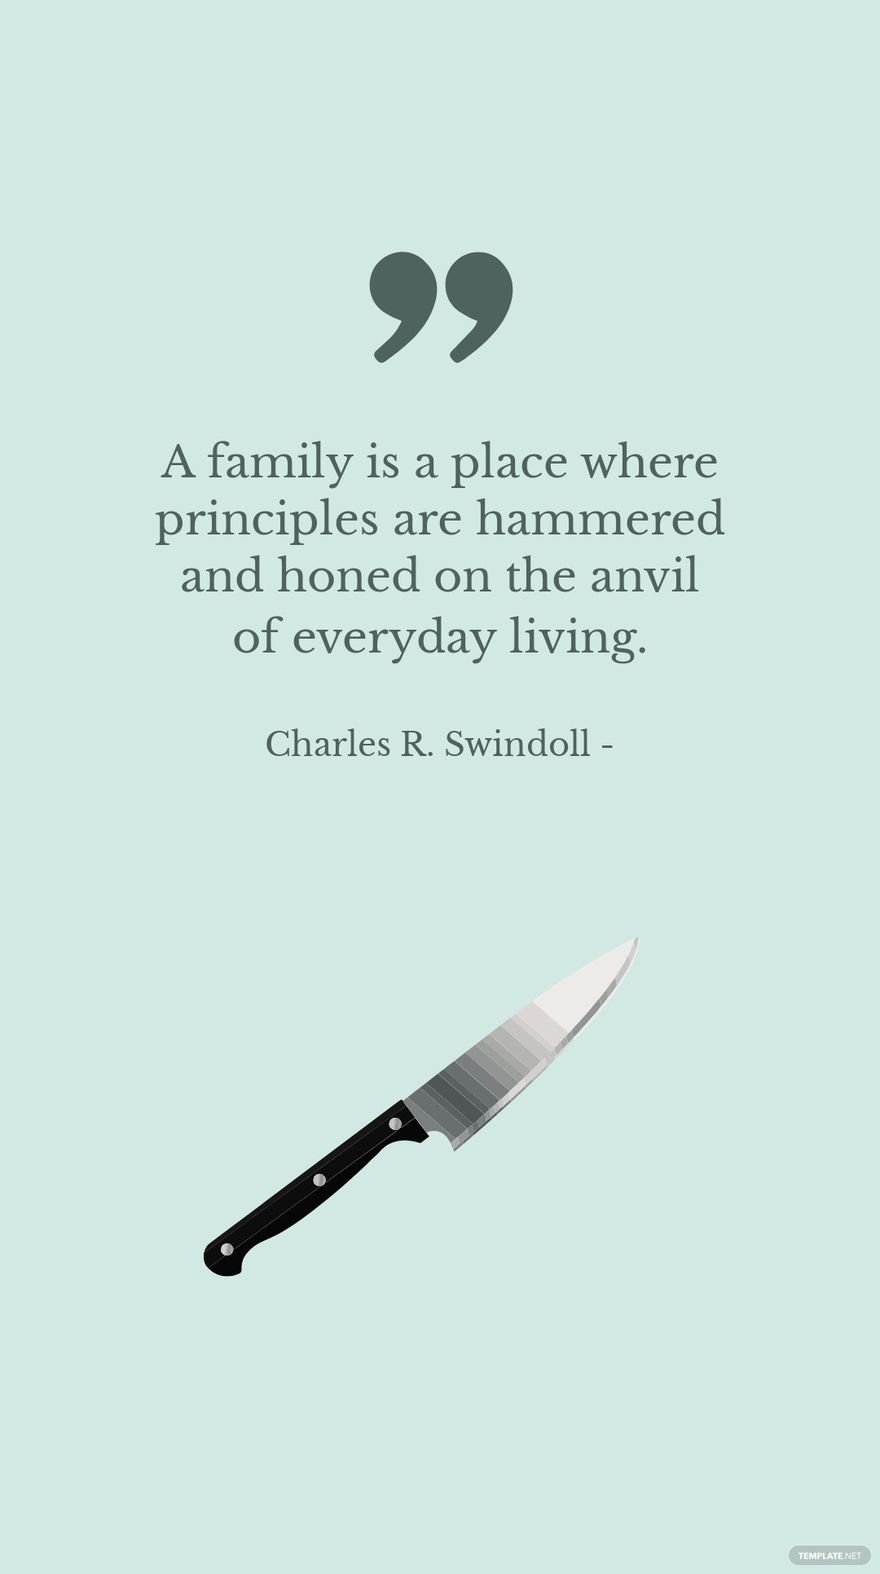 Free Charles R. Swindoll - A family is a place where principles are hammered and honed on the anvil of everyday living.